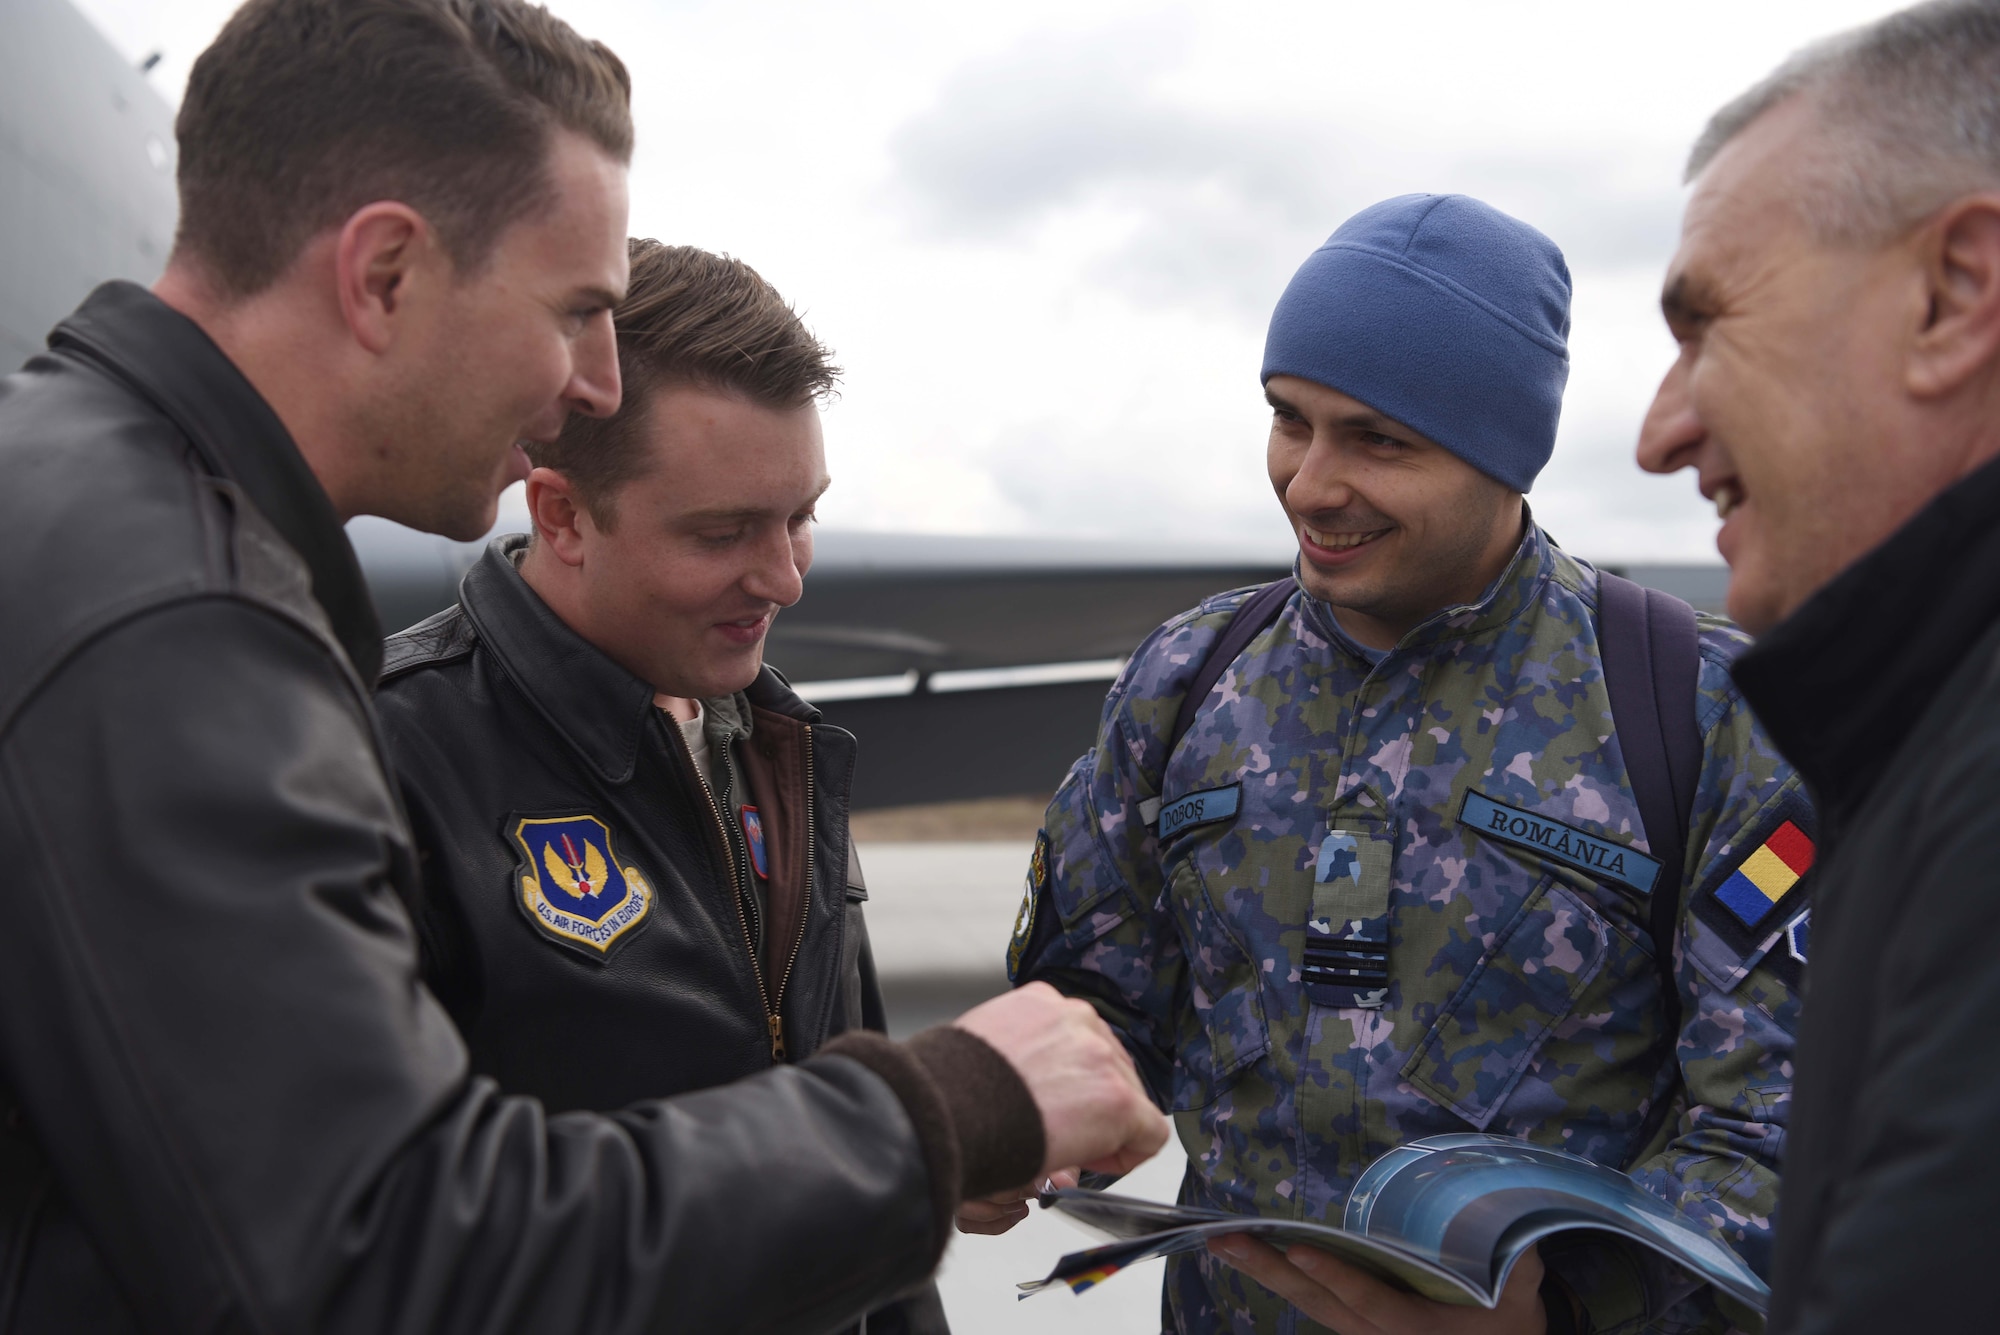 U.S. Airmen and Romanian air force members discuss aerial refueling events after training with Romanian air force F-16s in Bucharest, Romania, March 12, 2019. The crew trained with Romanian air force F-16s over the skies of Romania, which enhanced regional capabilities to secure air sovereignty and promote peace and security through cooperation, collaboration, interoperability with NATO allies in the region. (U.S. Air Force photo by Airman 1st Class Brandon Esau)